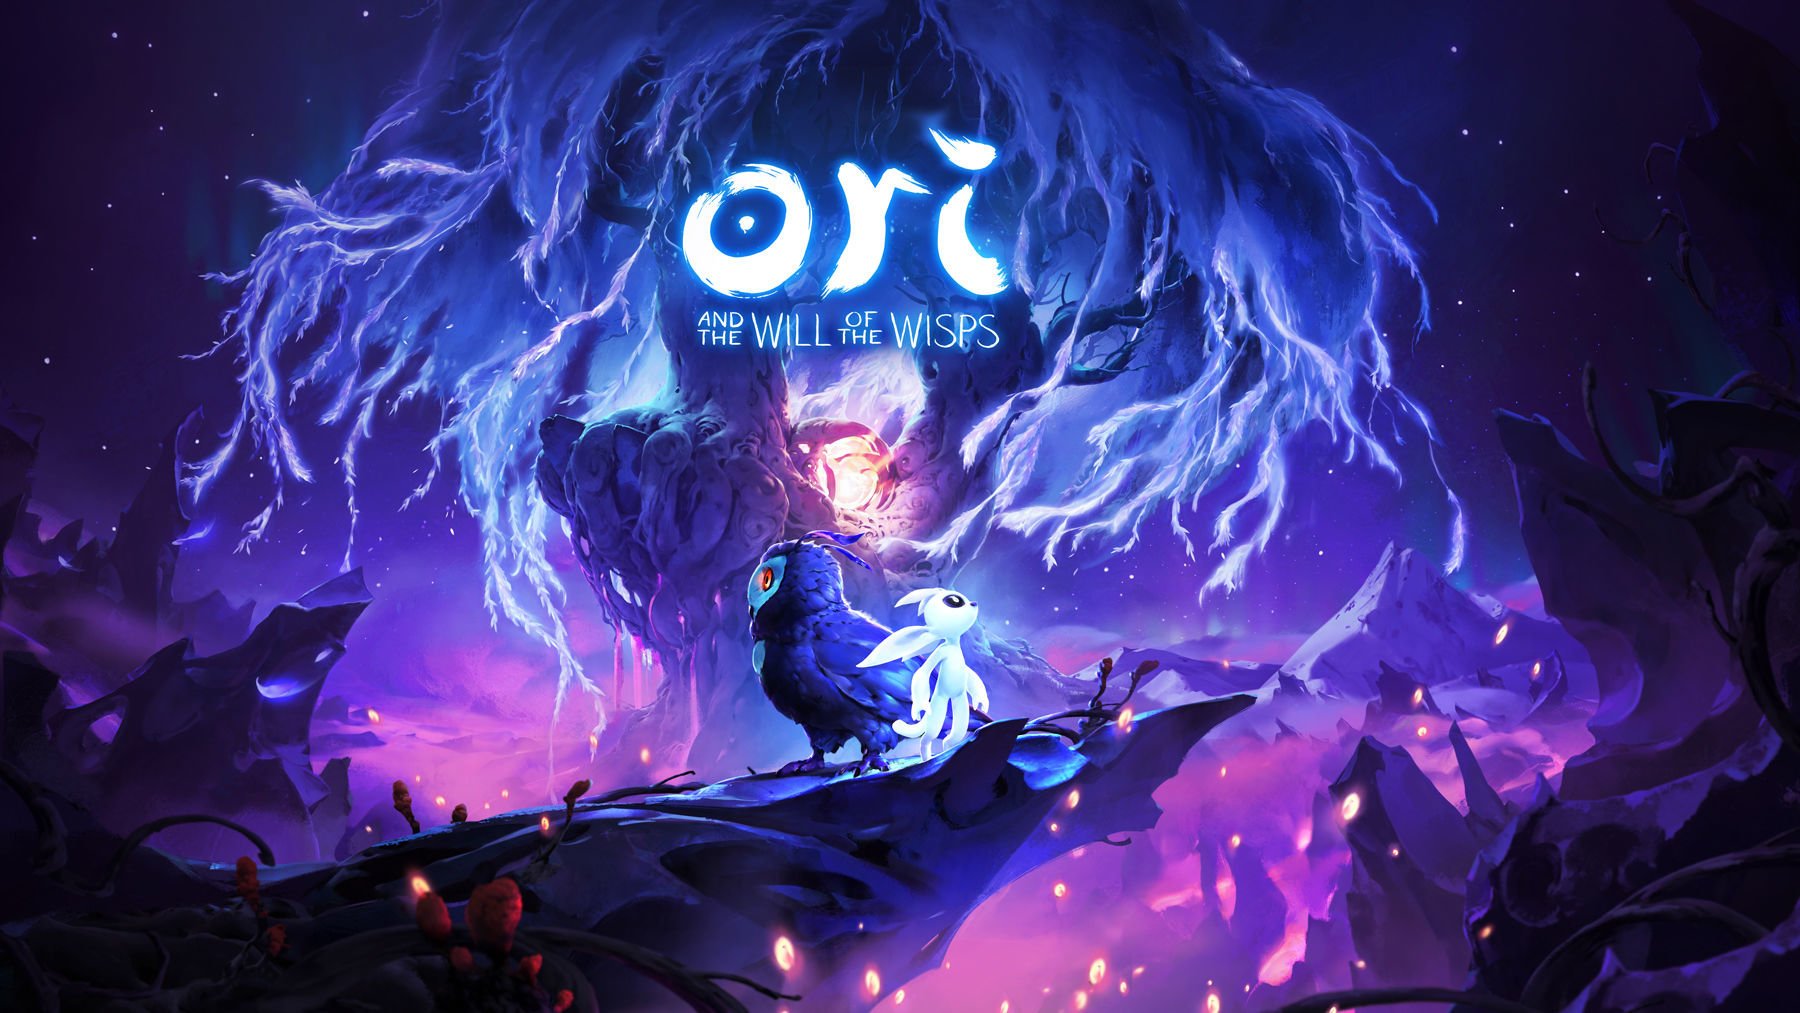 The wonderful 101 | ori and the will of the wisps na bgs 2019 | dims 2 | notícias